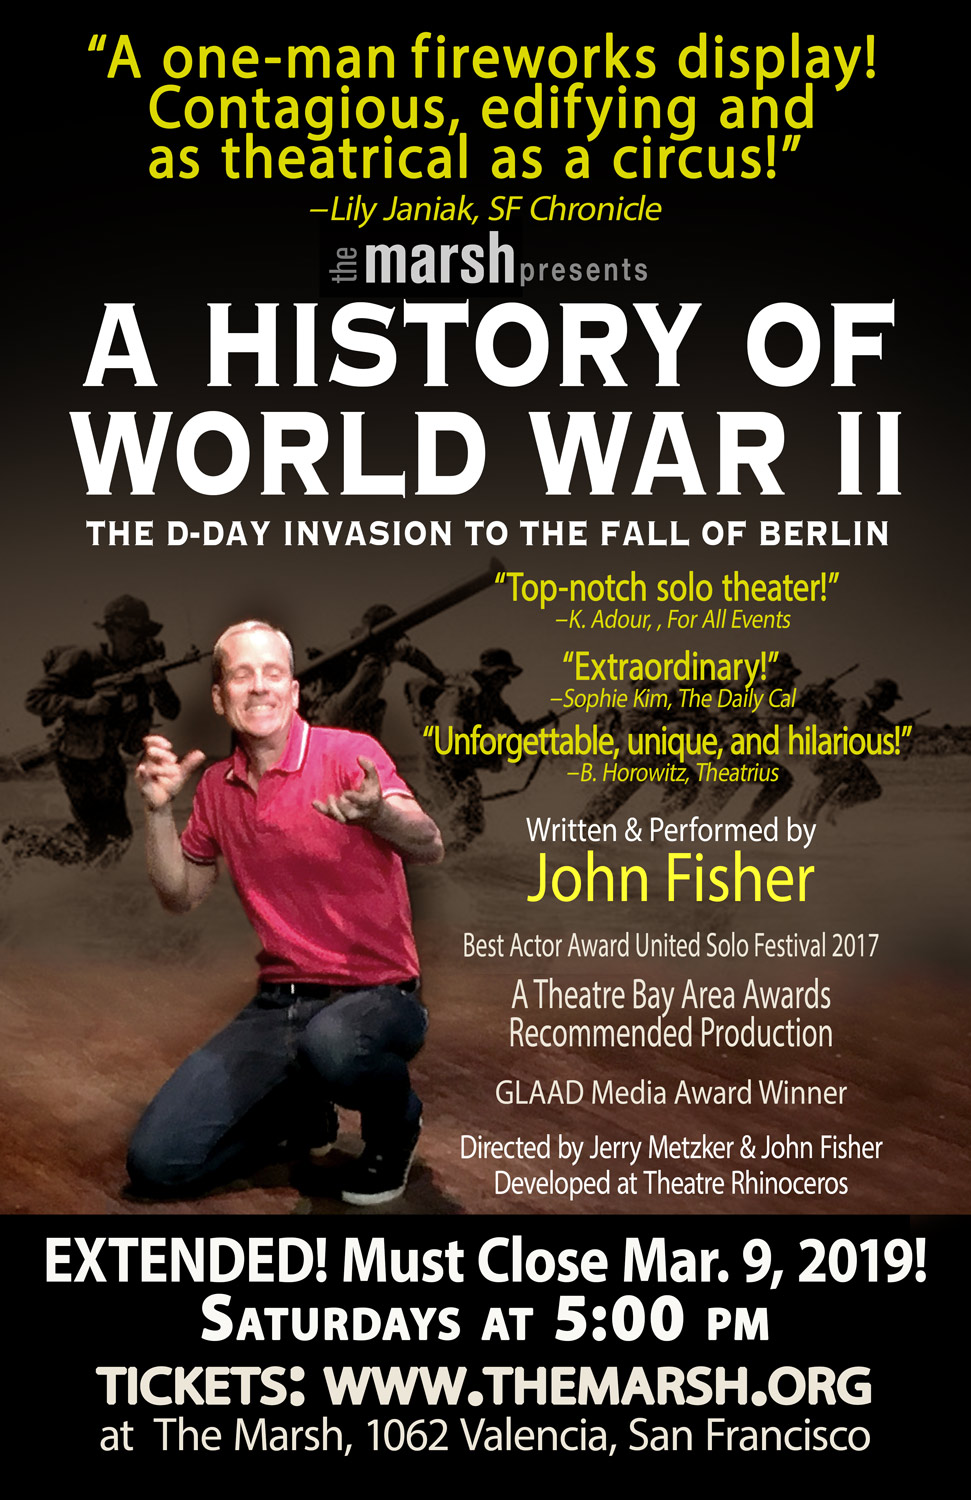 John Fisher in A History of World War II: The D-Day Invasion to the Fall of Berlin